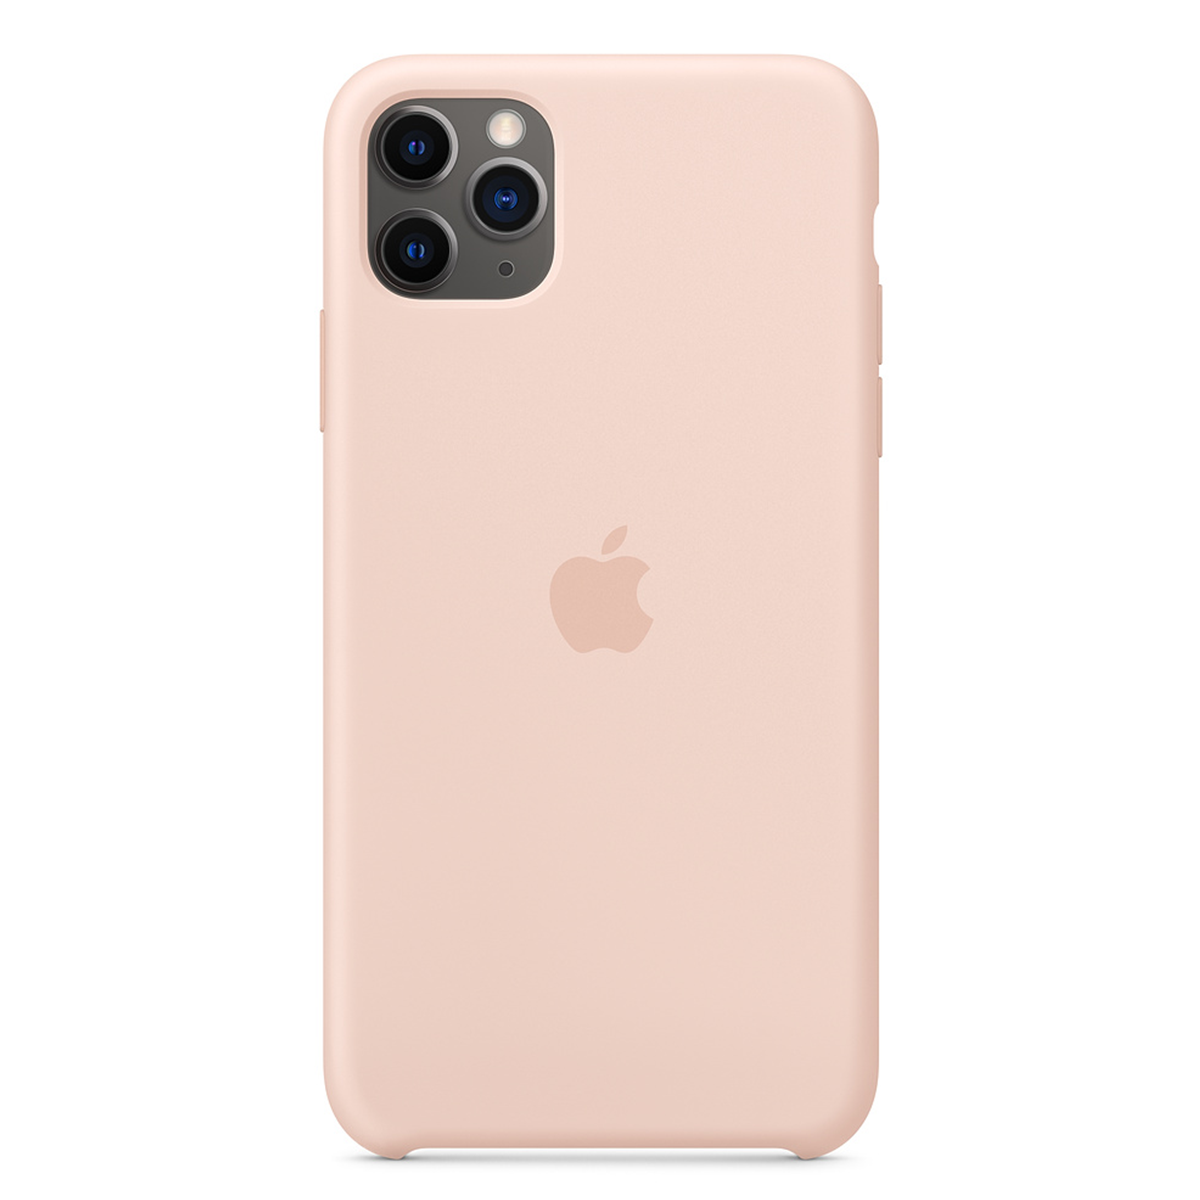 iPhone 11 Pro Max Silicone Case Pink Sand